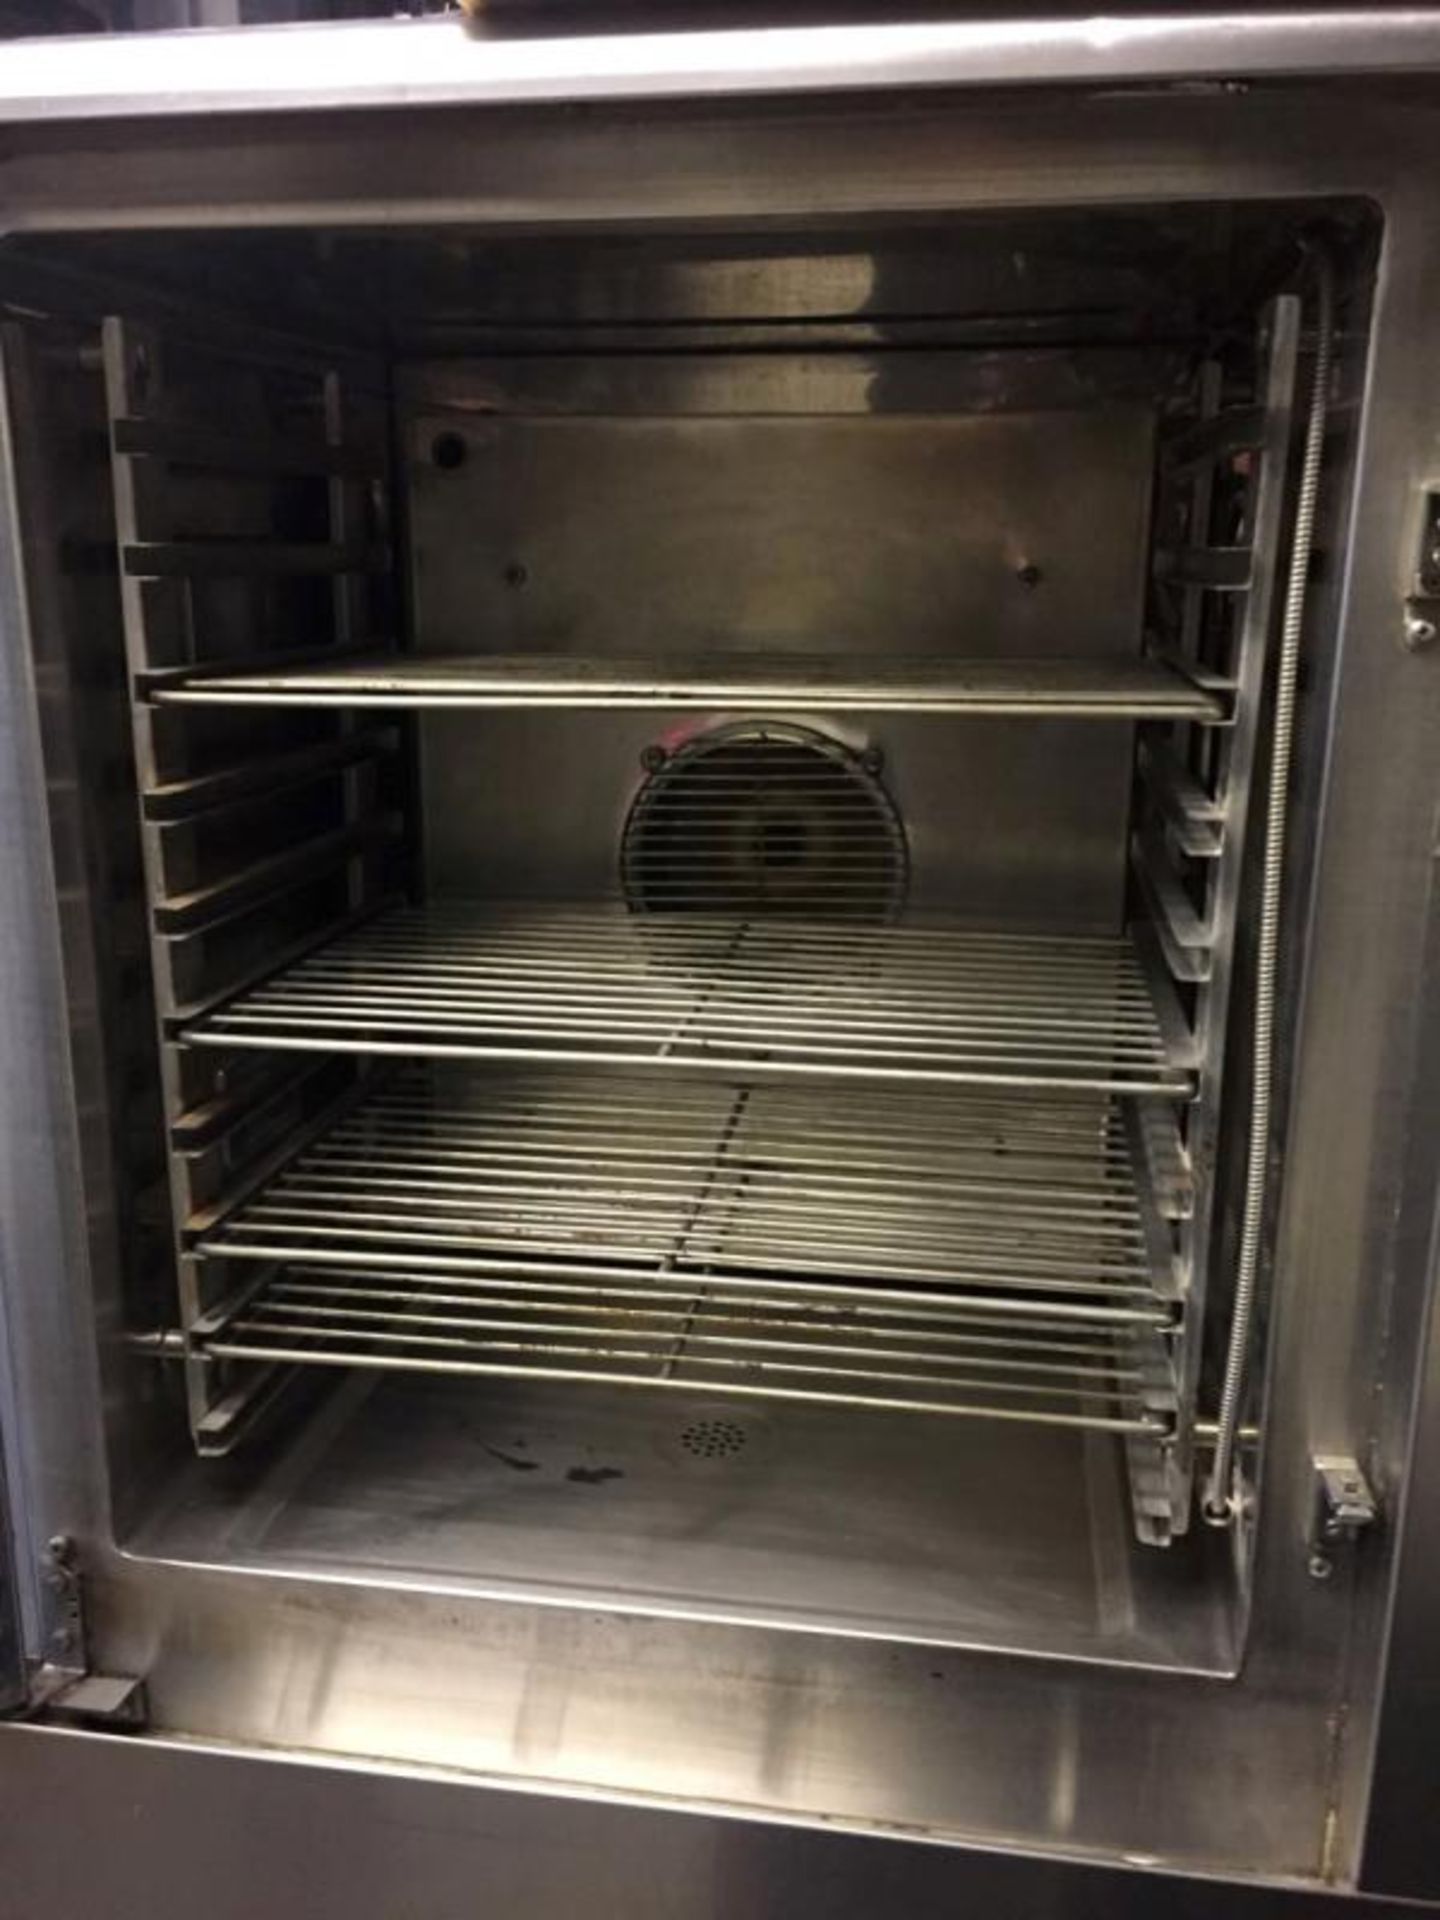 1 x Falcon CONVECTASTEAM-10 Commercial Convection Oven With Stand (Model: E4103TC) - Phase 3 - Featu - Image 10 of 17